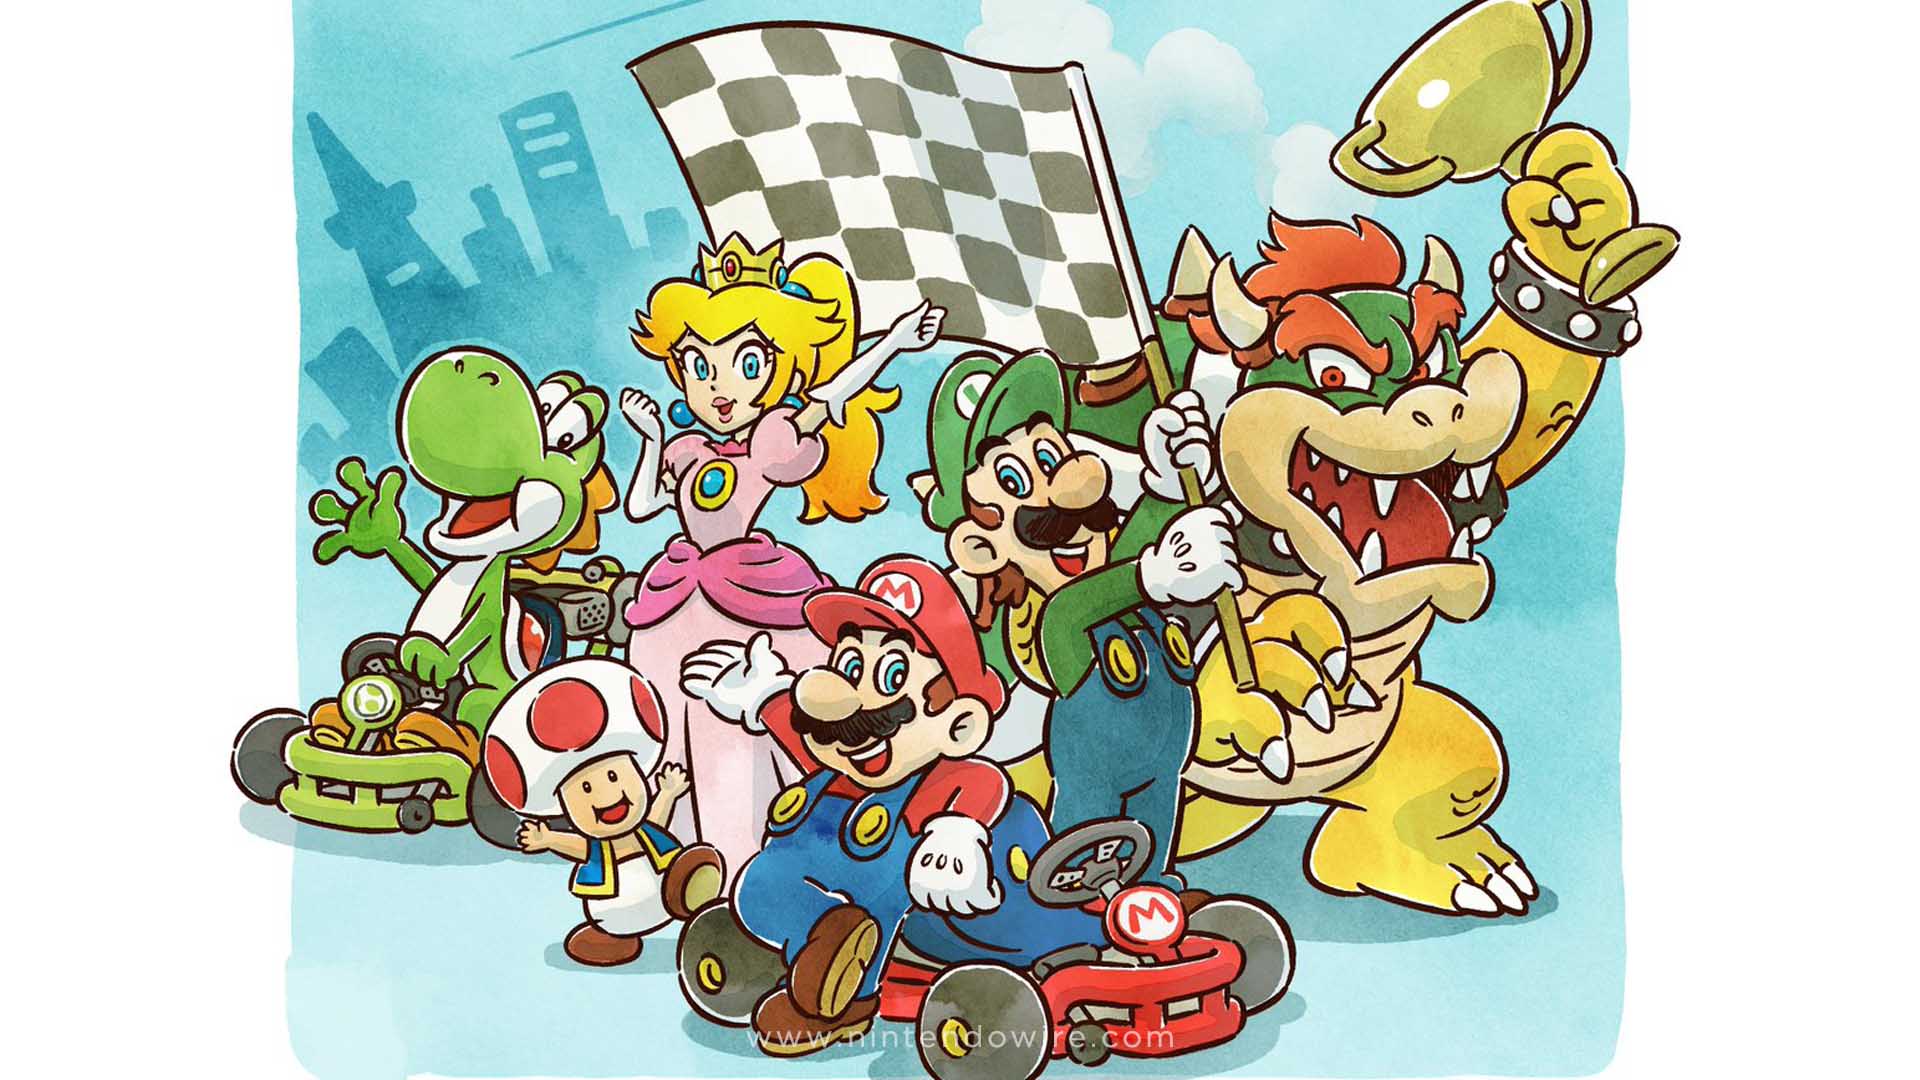 Mario Kart Tour: The ultimate guide